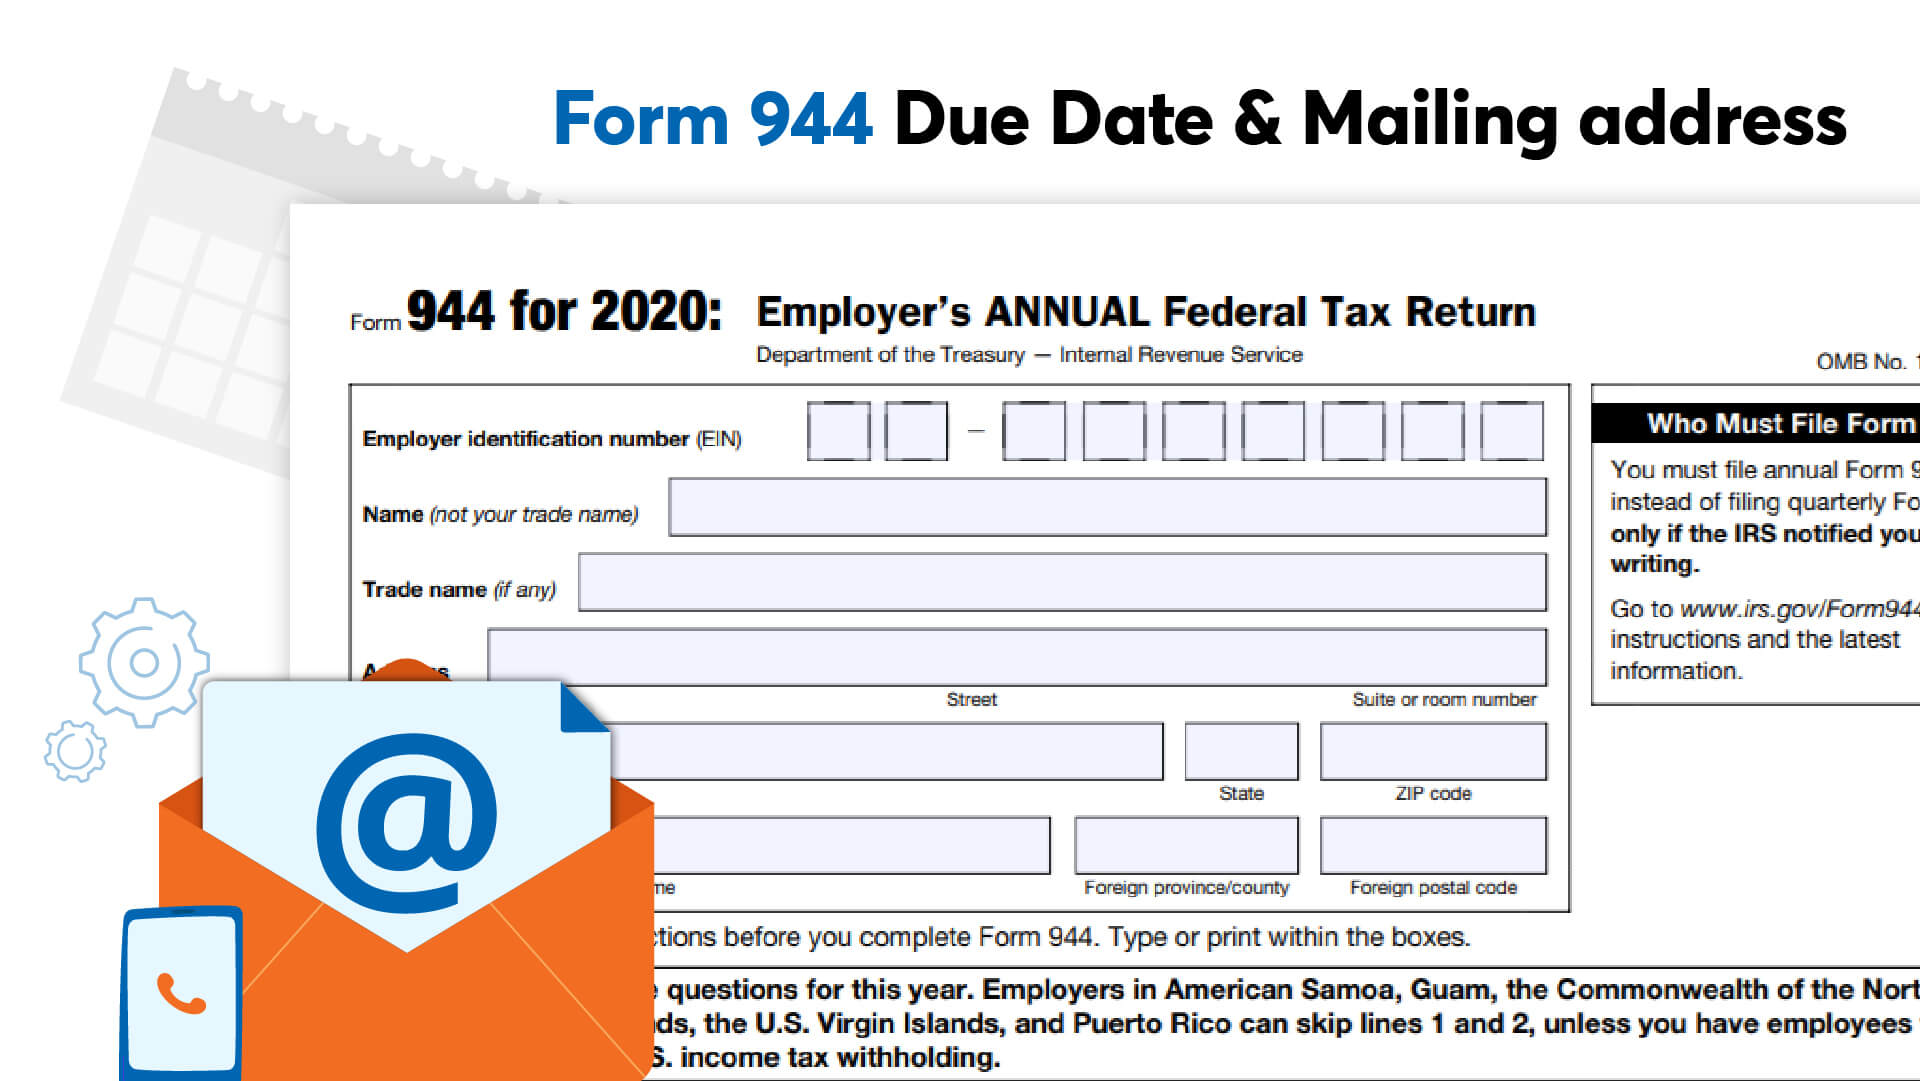 Form 944 Due Date & Mailing address